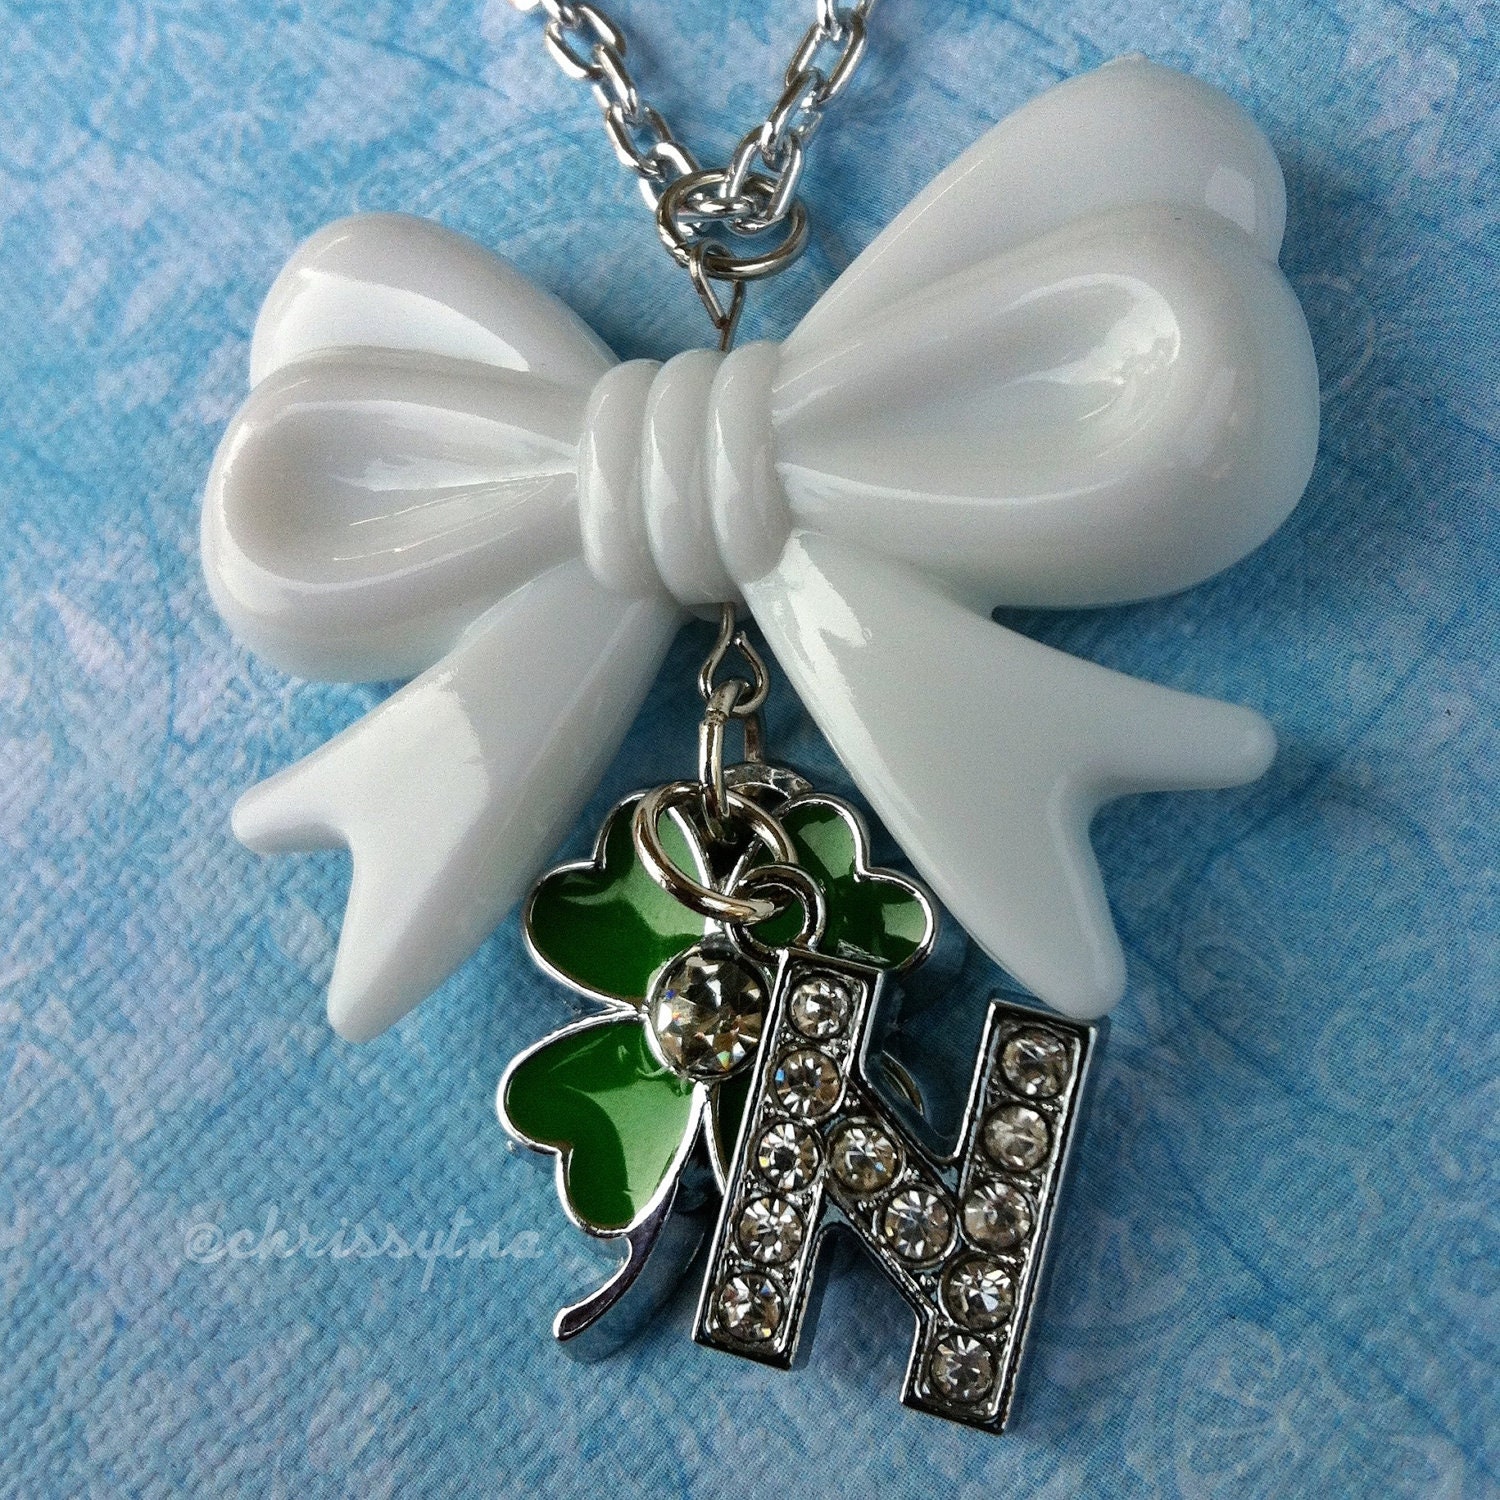 SALE - One Direction inspired bow necklace // N for Niall Horan